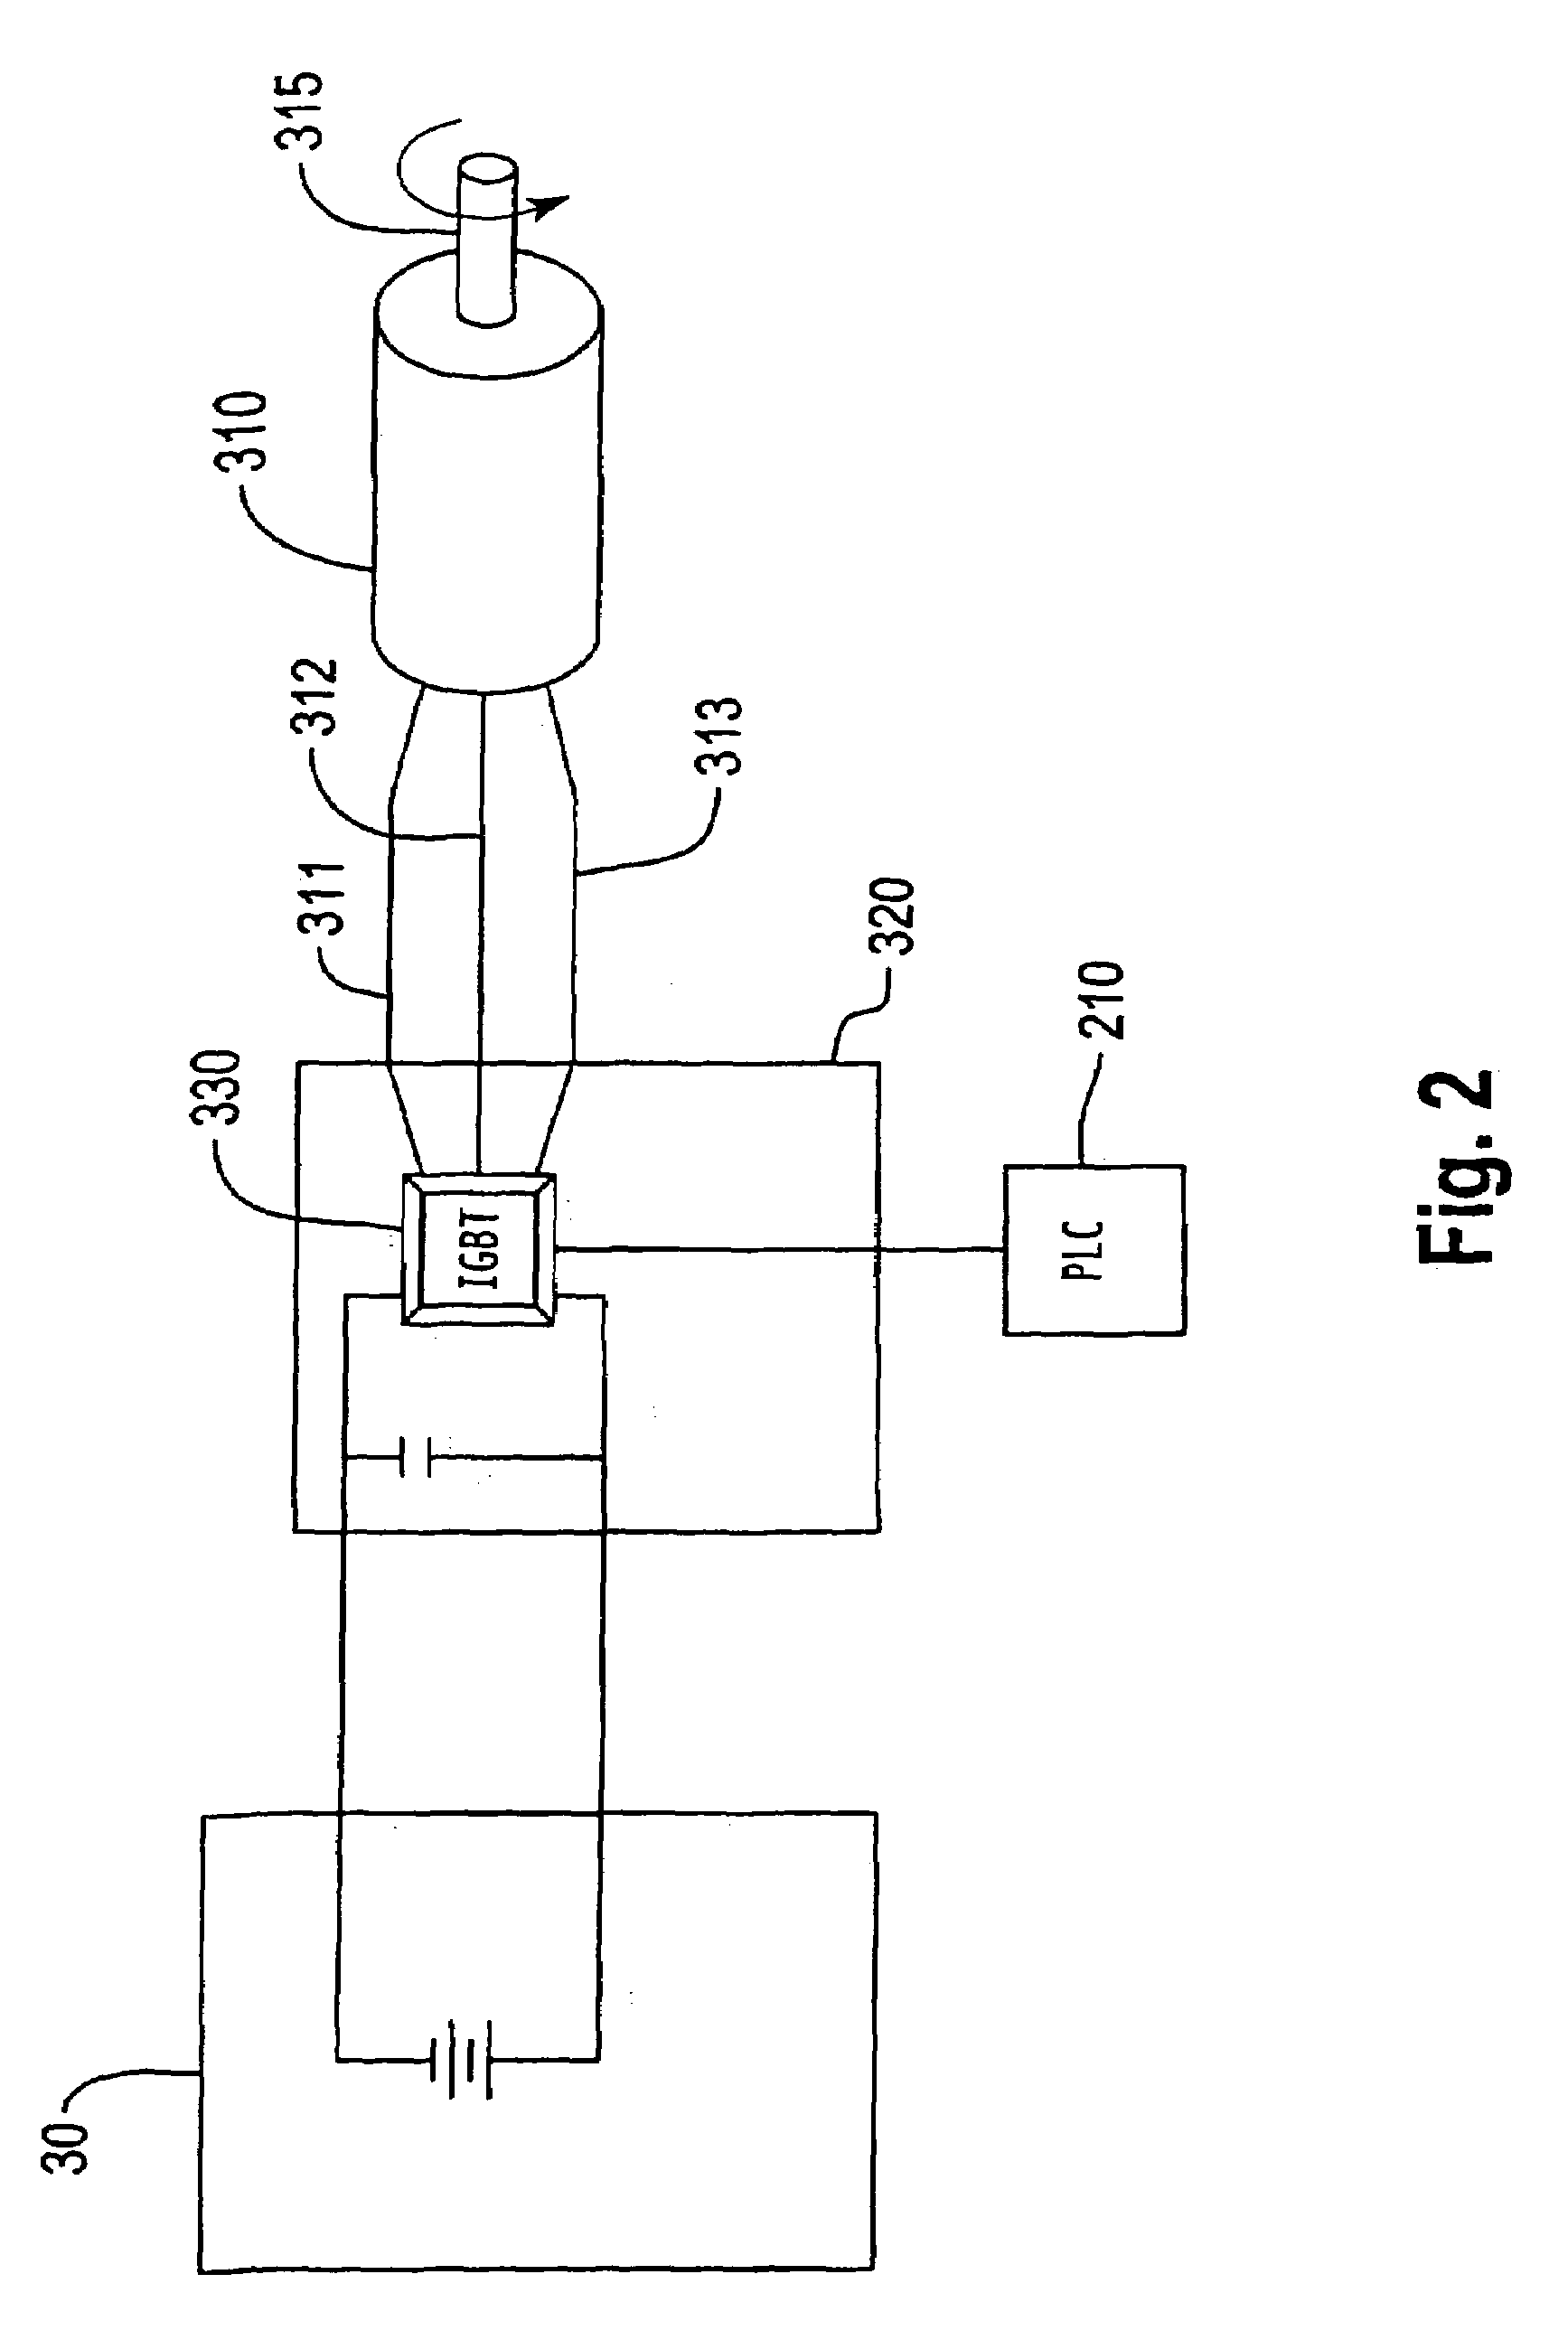 Method and apparatus for adaptive control of traction drive units in a hybrid vehicle